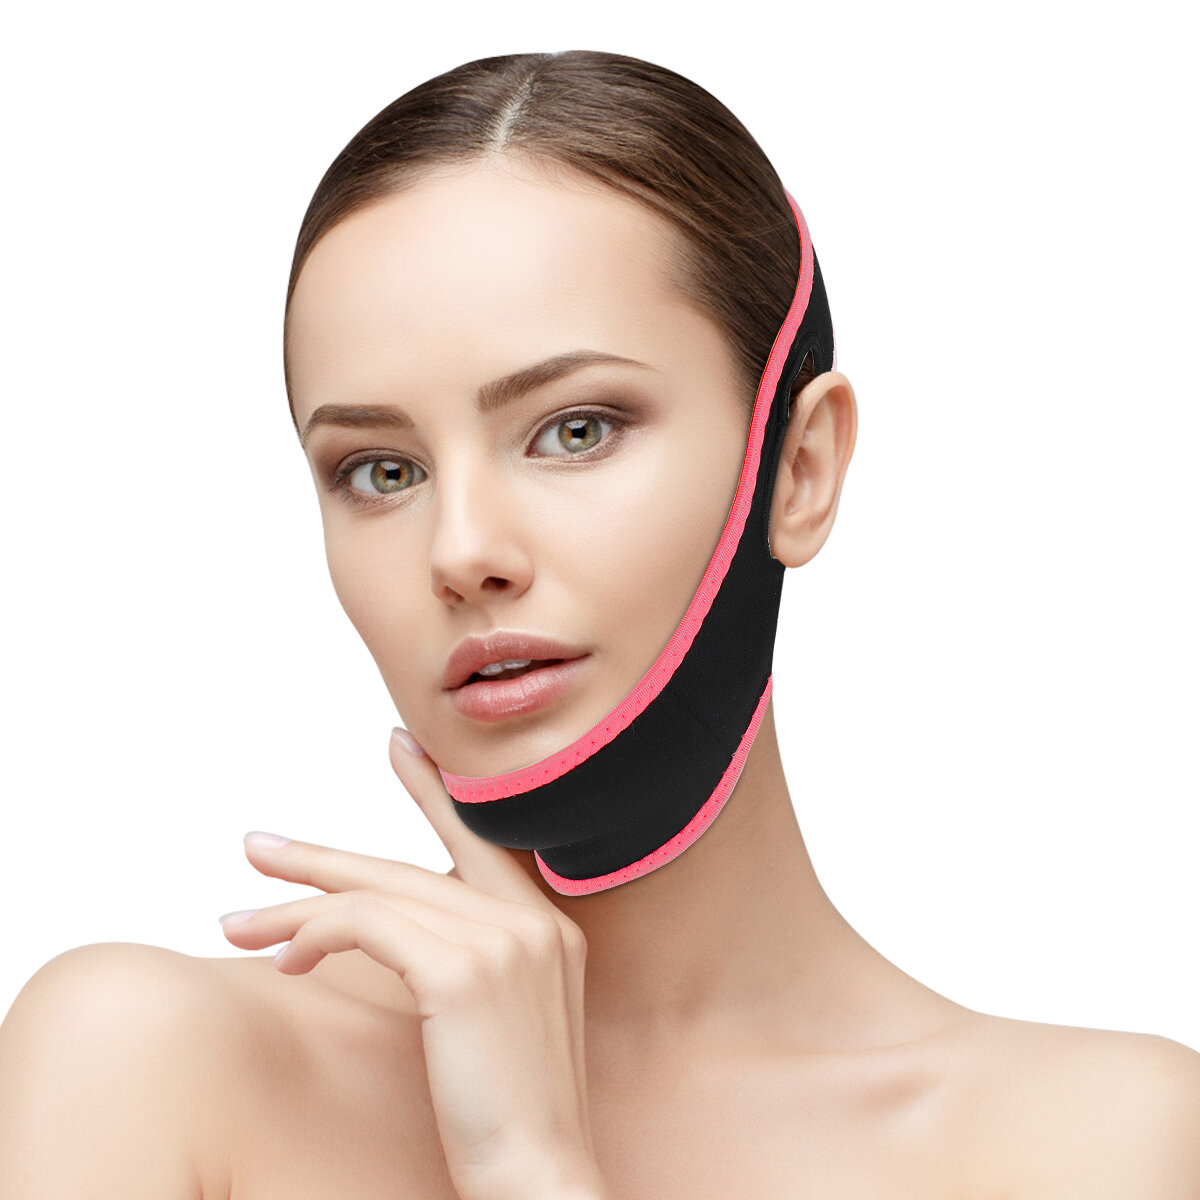 Facial Slimming Bandage Face V Shaper Relaxation Lift Up Belt Reduce Double Chin tool